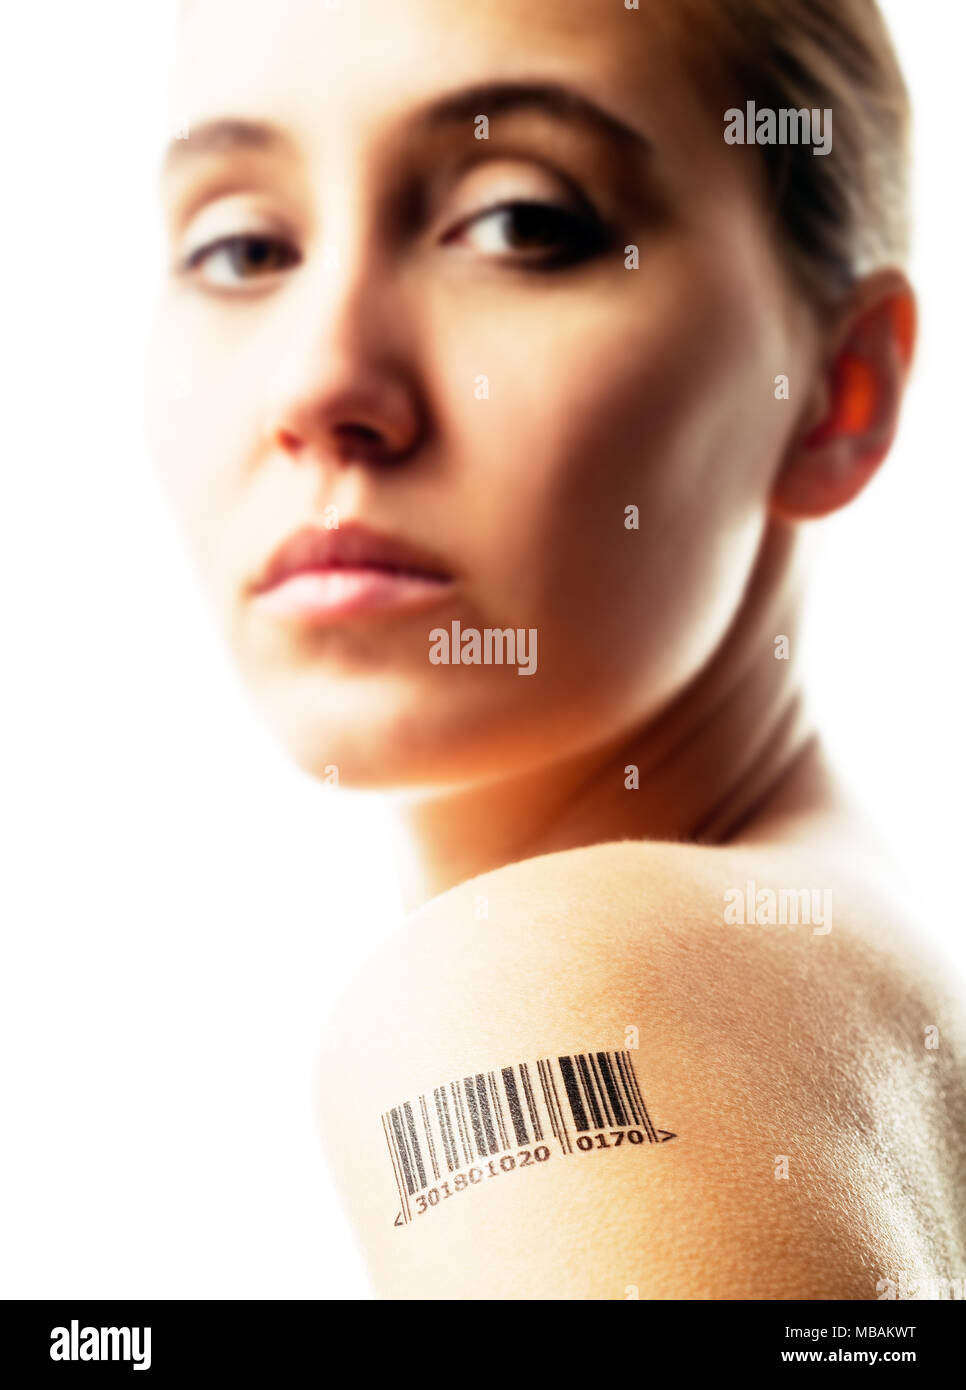 Portrait of woman with bar code tattoo on her shoulder Stock Photo